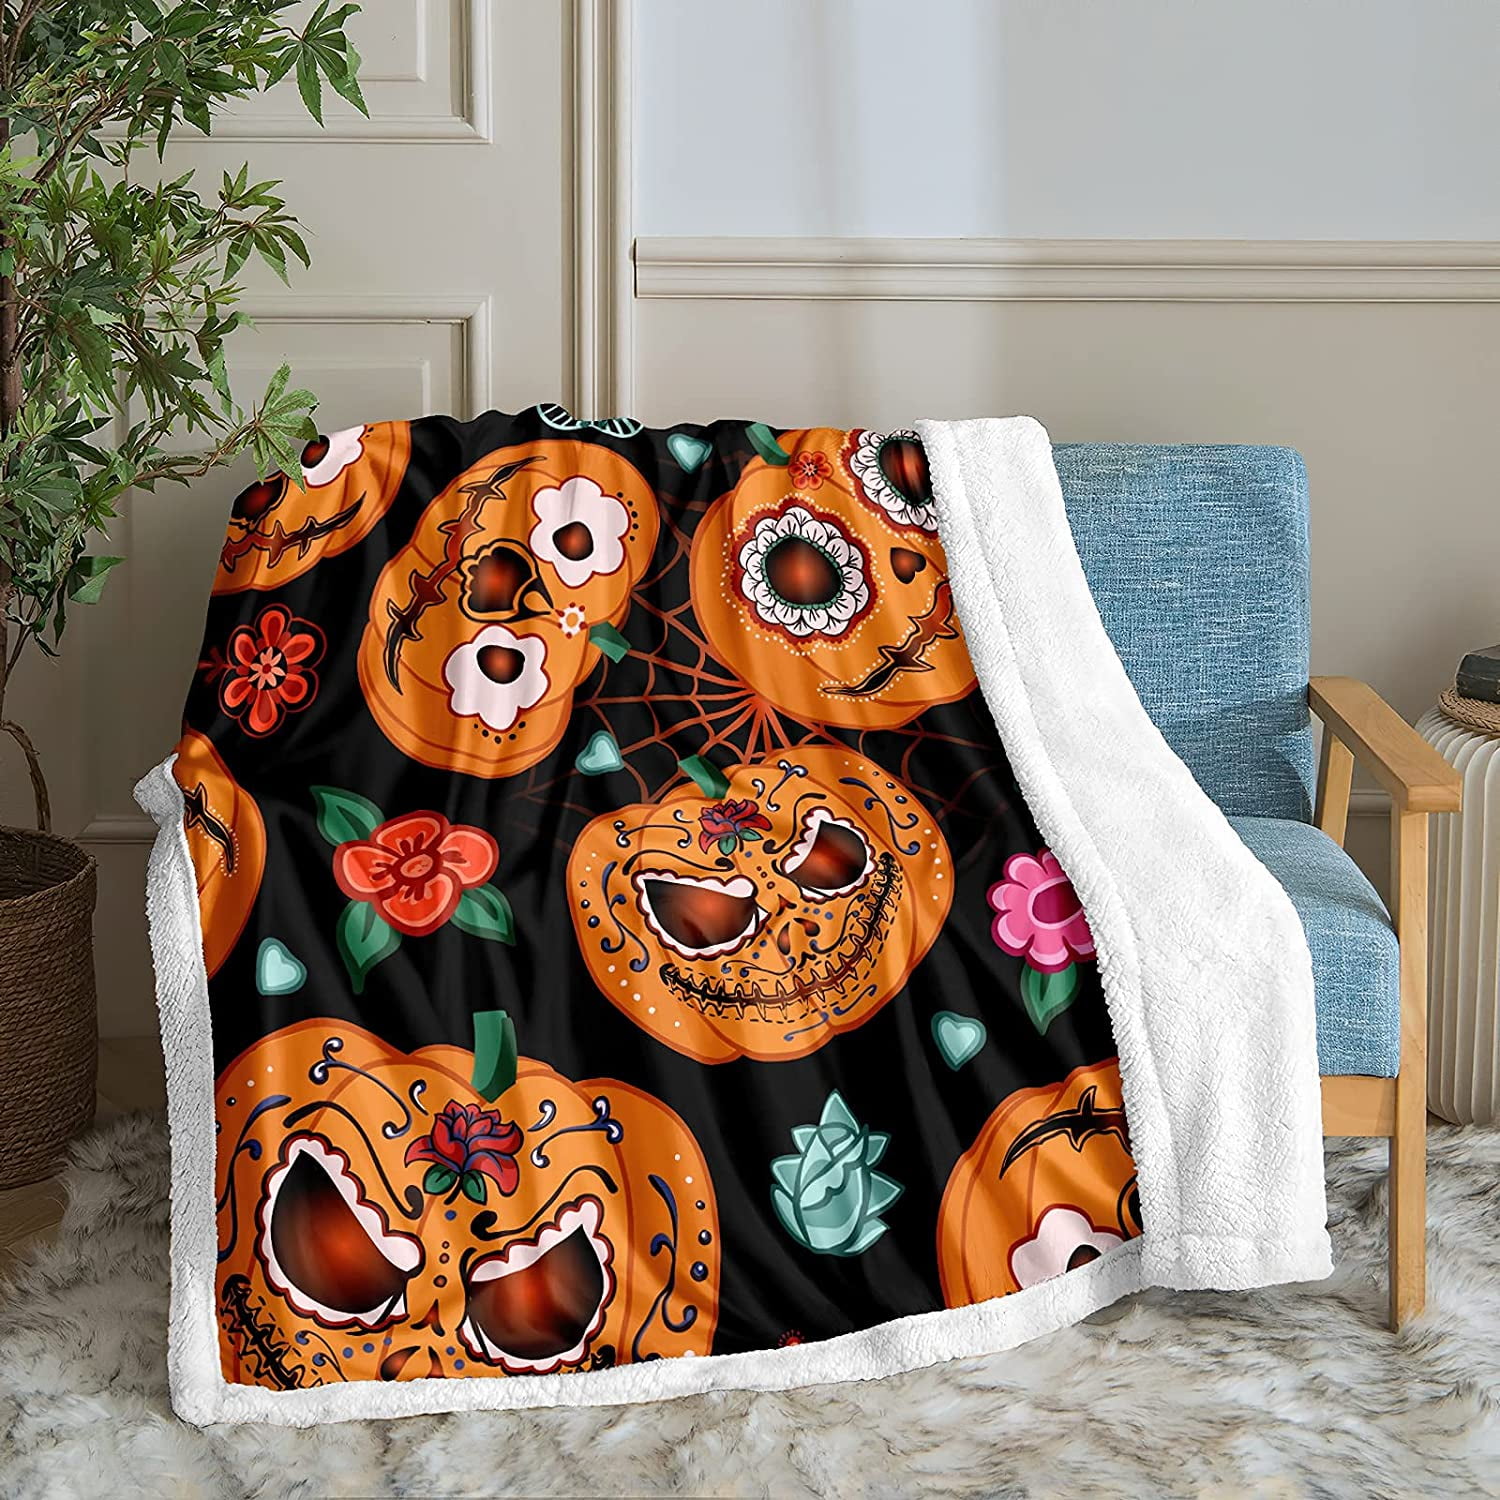 Premium Halloween Throw Blankets,Black Orange Buffalo Check Plaid Pumpkins Blankets for Couch Bed Sofa,Fuzzy Plush Fluffy Soft Fleece Blankets and Throws for Adults Kids,50X40 